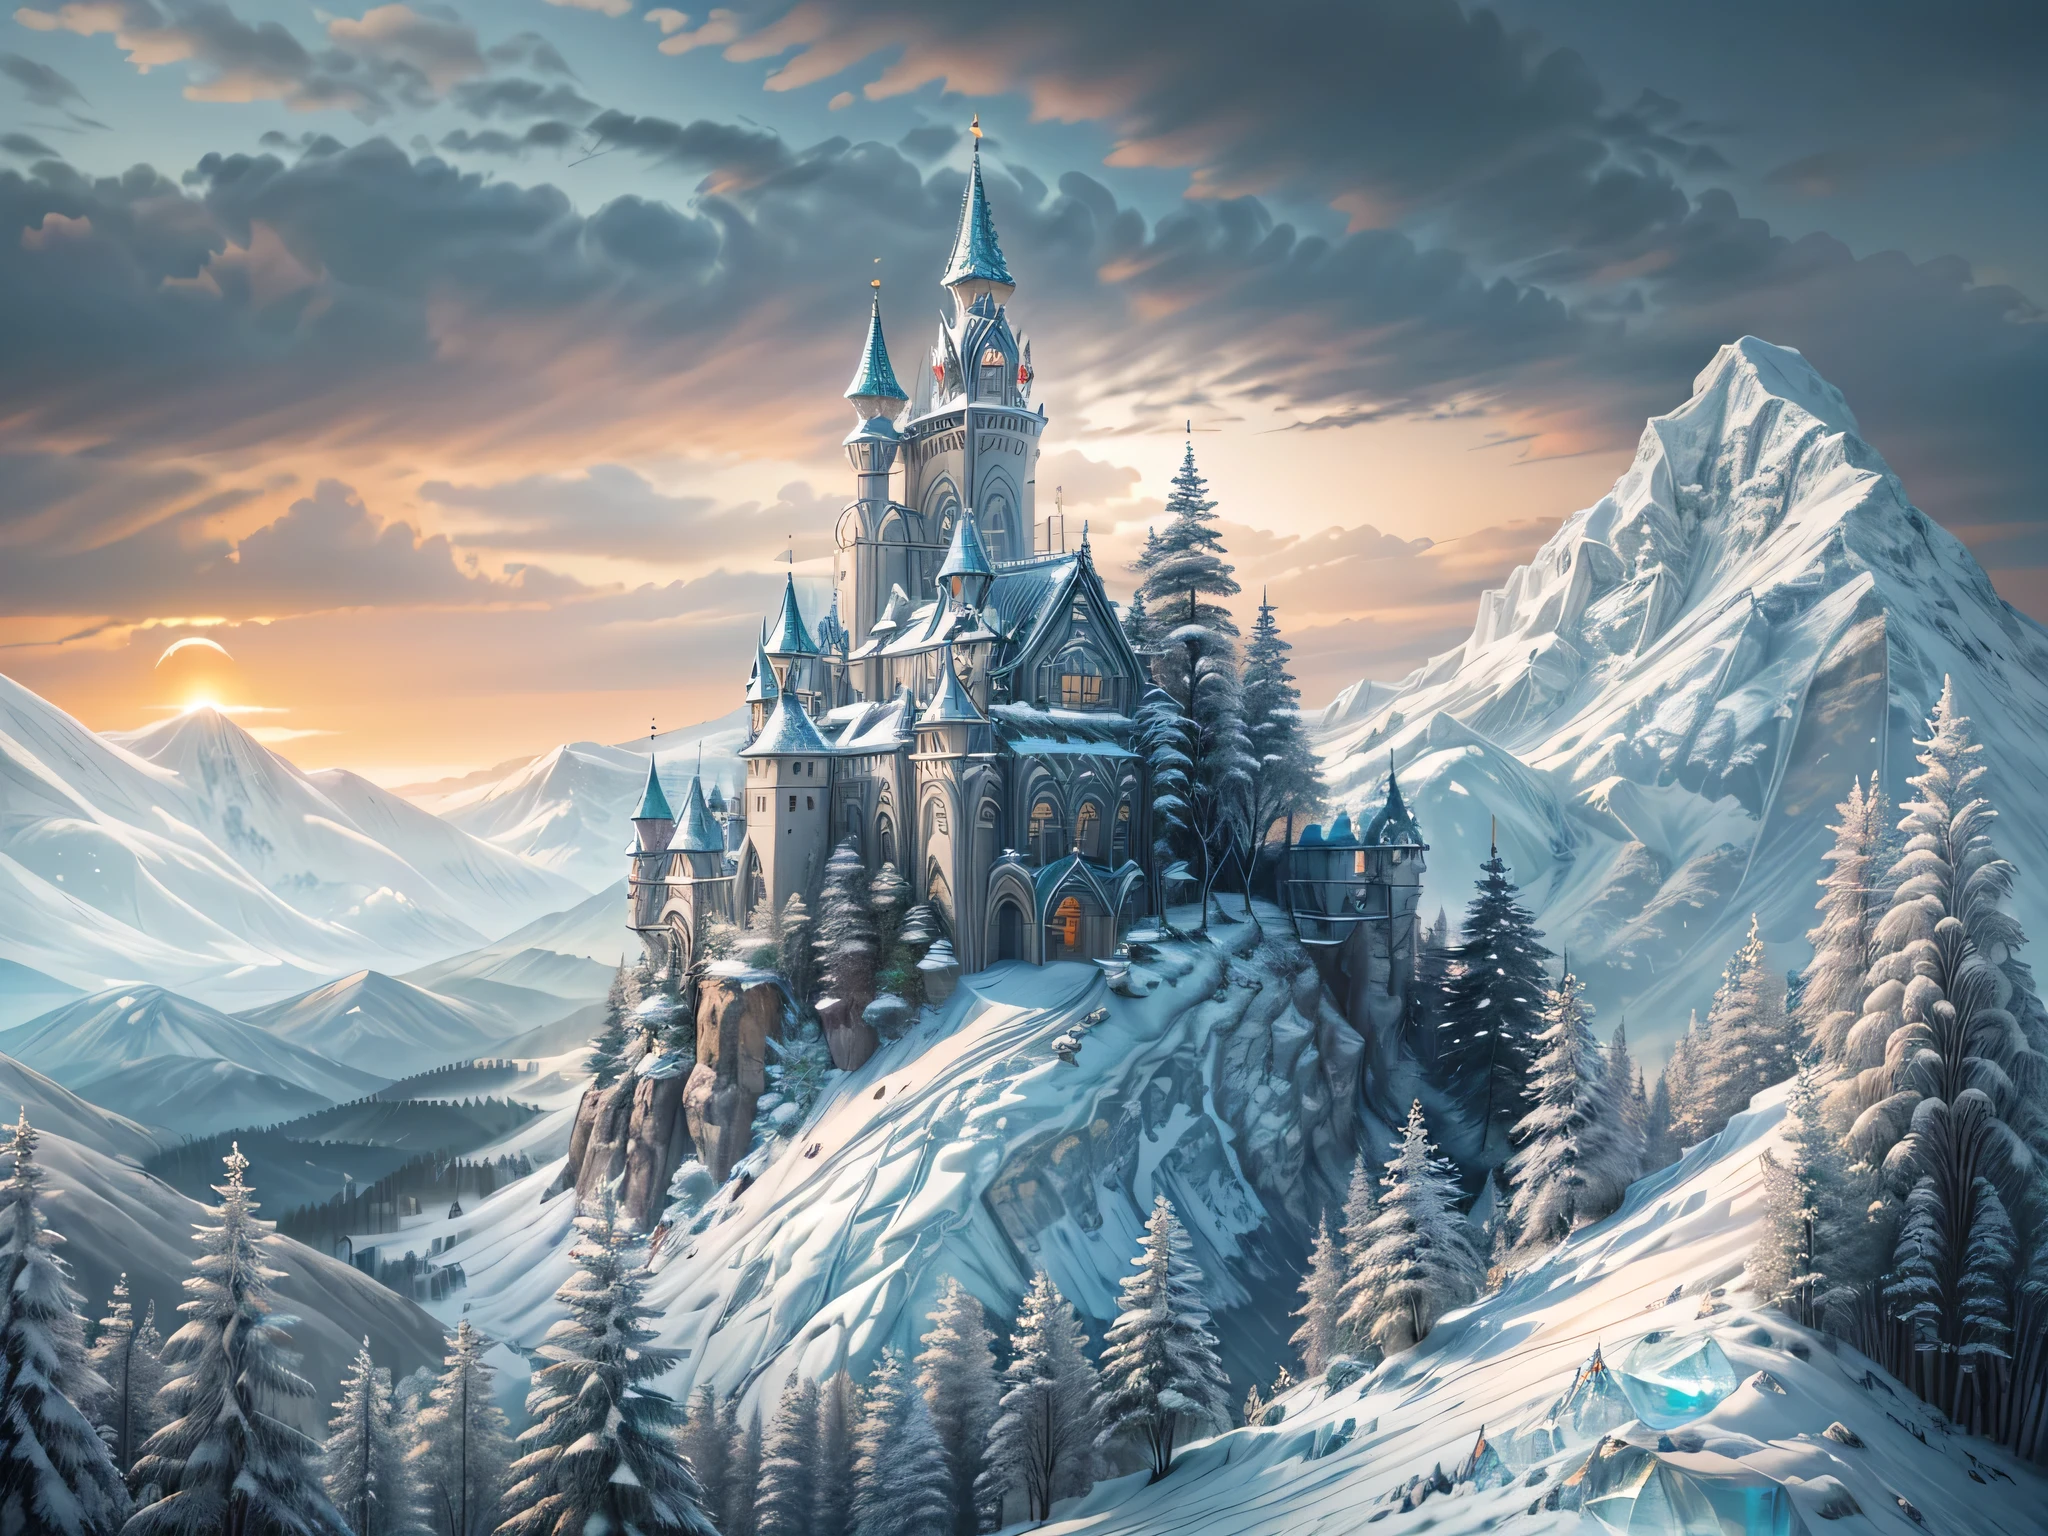 a panoramic award winning photography, Photorealistic, extremely detailed of a castle made from (ice: 1.3) made_of_ice standing on the peak of a snowy mountain, an impressive best detailed castle made from ice (Photorealistic, extremely detailed), with towers, bridges, a moat filled with lava (Photorealistic, extremely detailed),  standing on top of a snowy mountain (masterpiece, extremely detailed, best quality), with pine trees, sunset light, some clouds in the air,  alpine mountain range background, best realistic, best details, best quality, 16k, [ultra detailed], masterpiece, best quality, (extremely detailed), ultra wide shot, photorealism, depth of field,